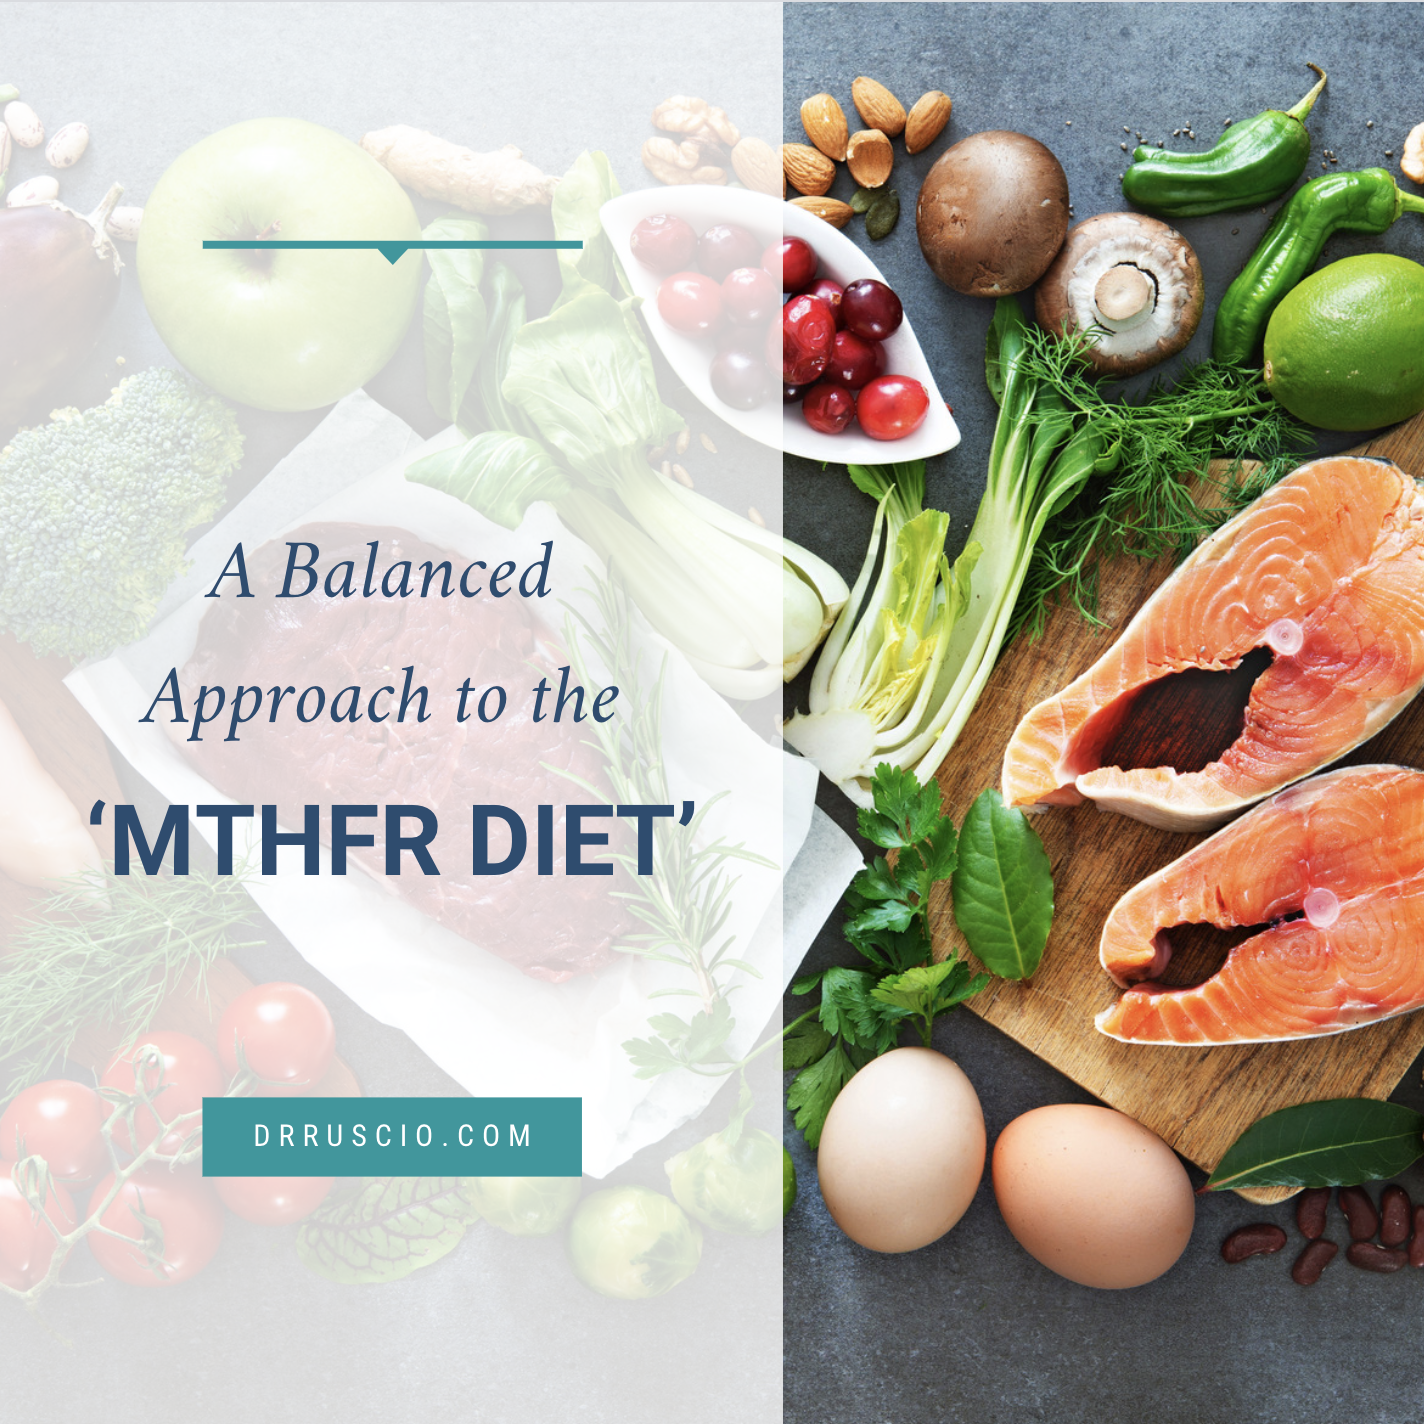 A Balanced Approach to the ‘MTHFR Diet’